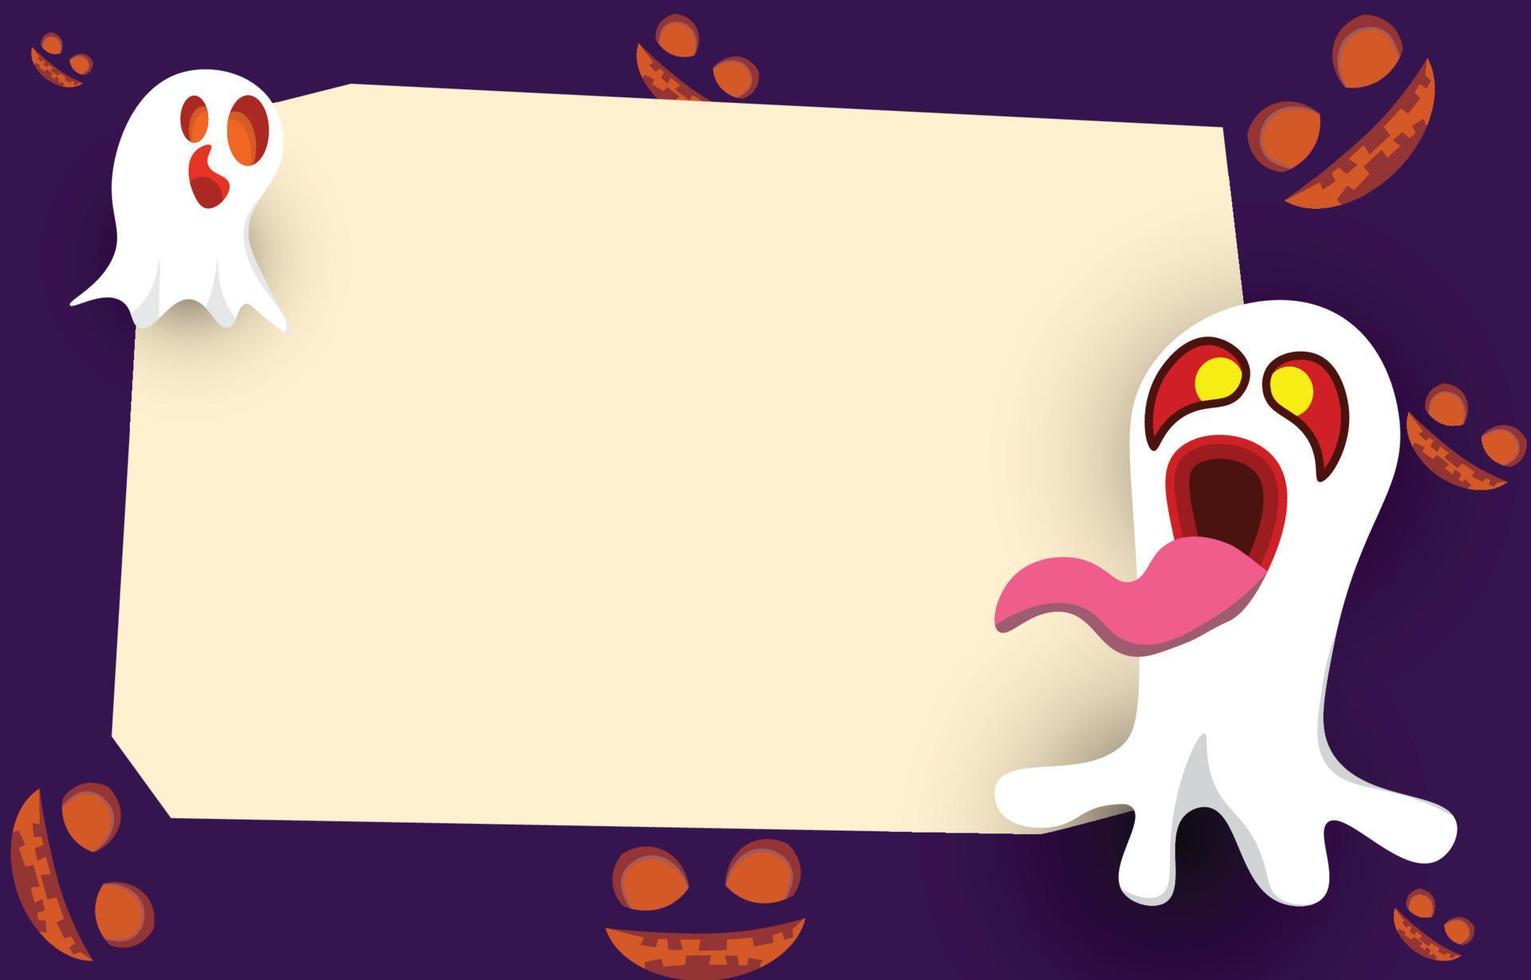 blank paper background with scary and fun ghost , with copy space for Halloween design or sale banner, vector illustration.